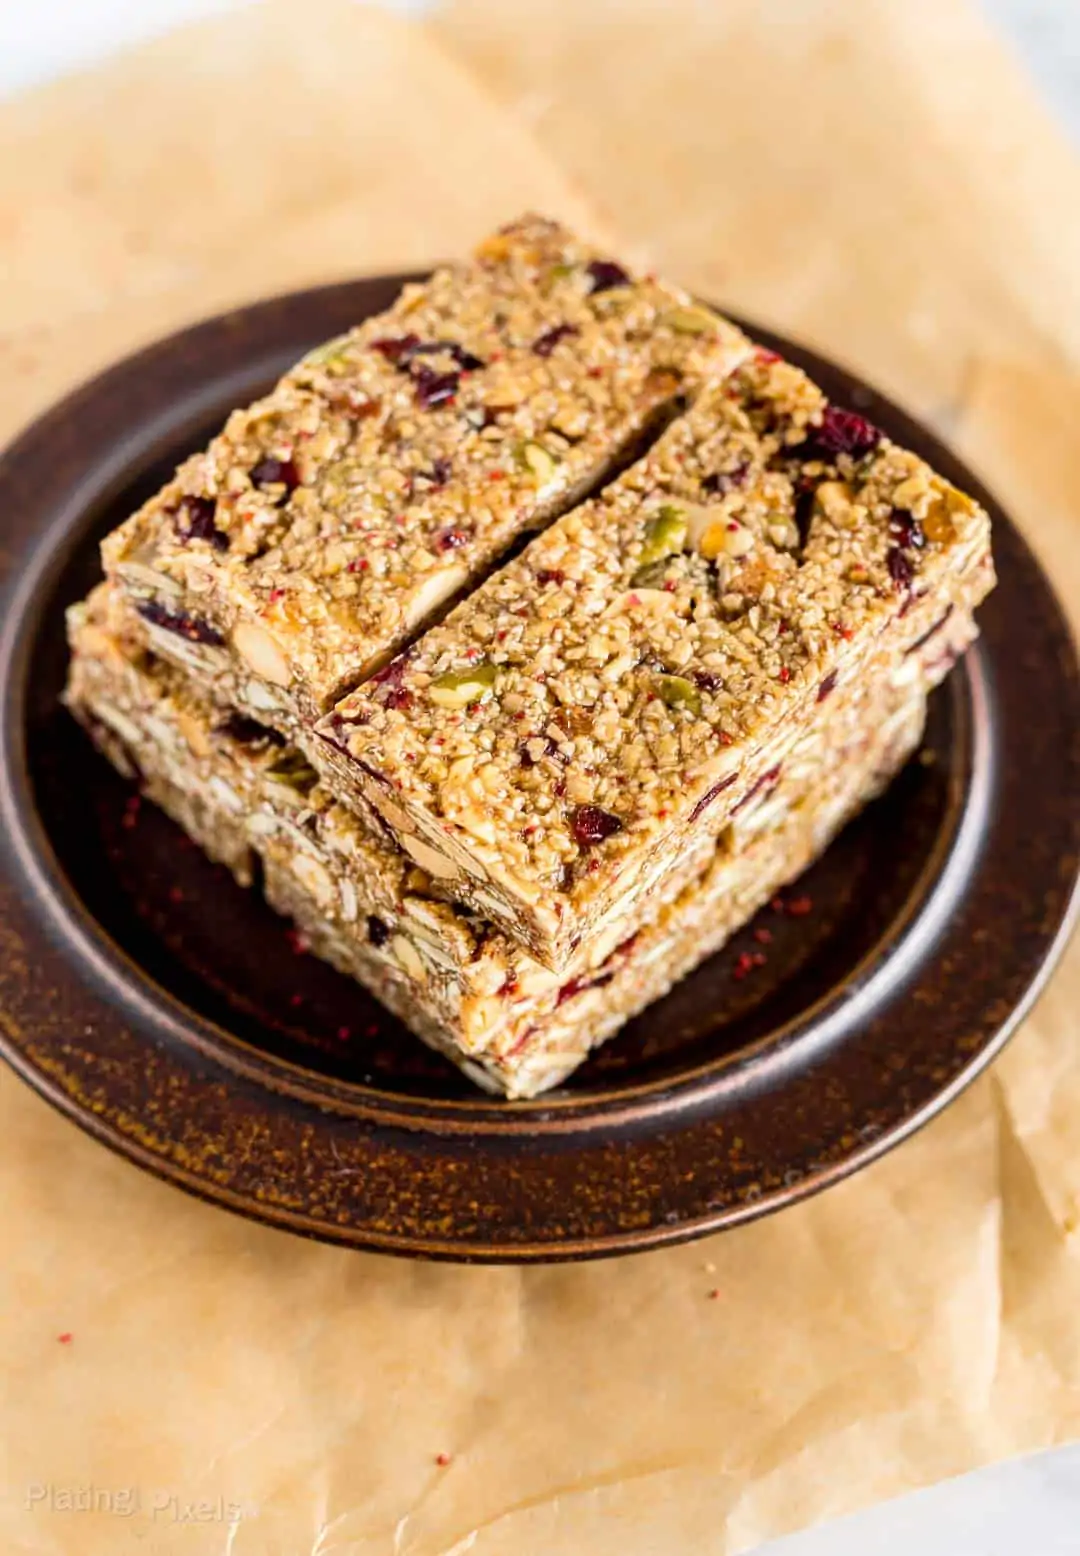 Cranberry Almond Granola Bars on a plate